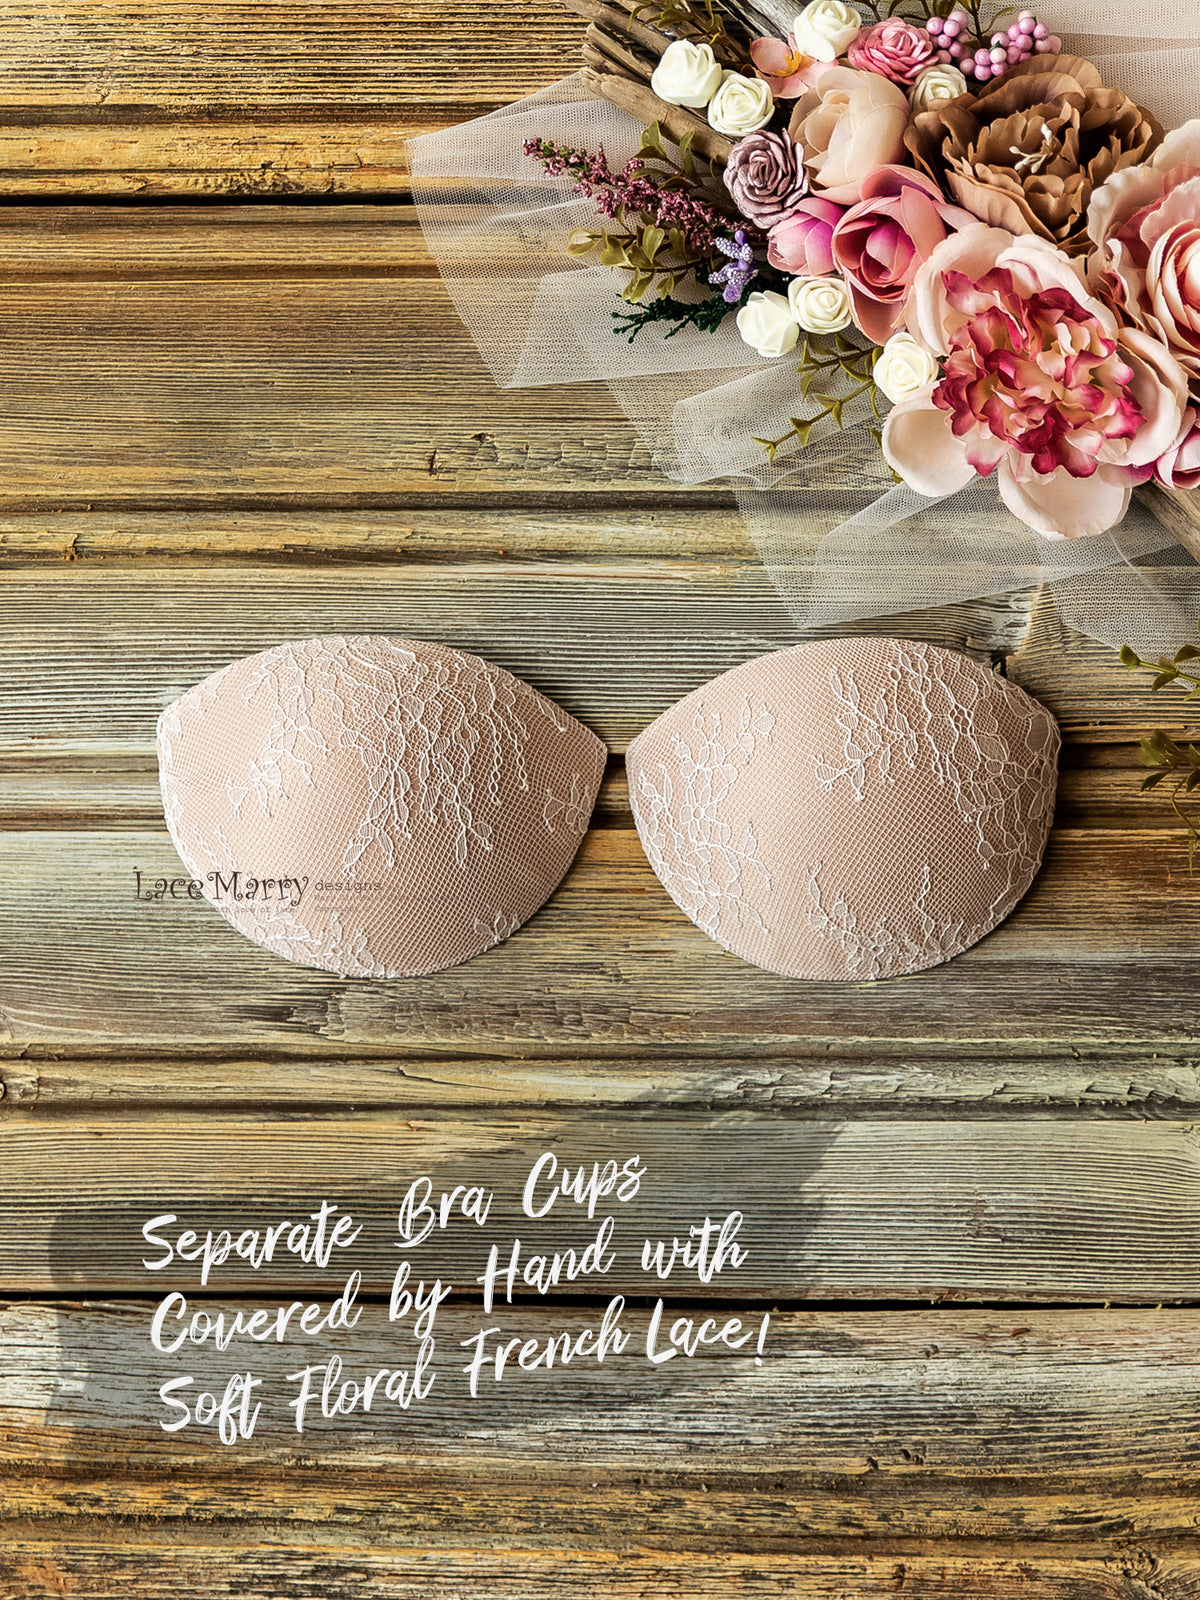 Bridal Bra Cups with Lace Cover